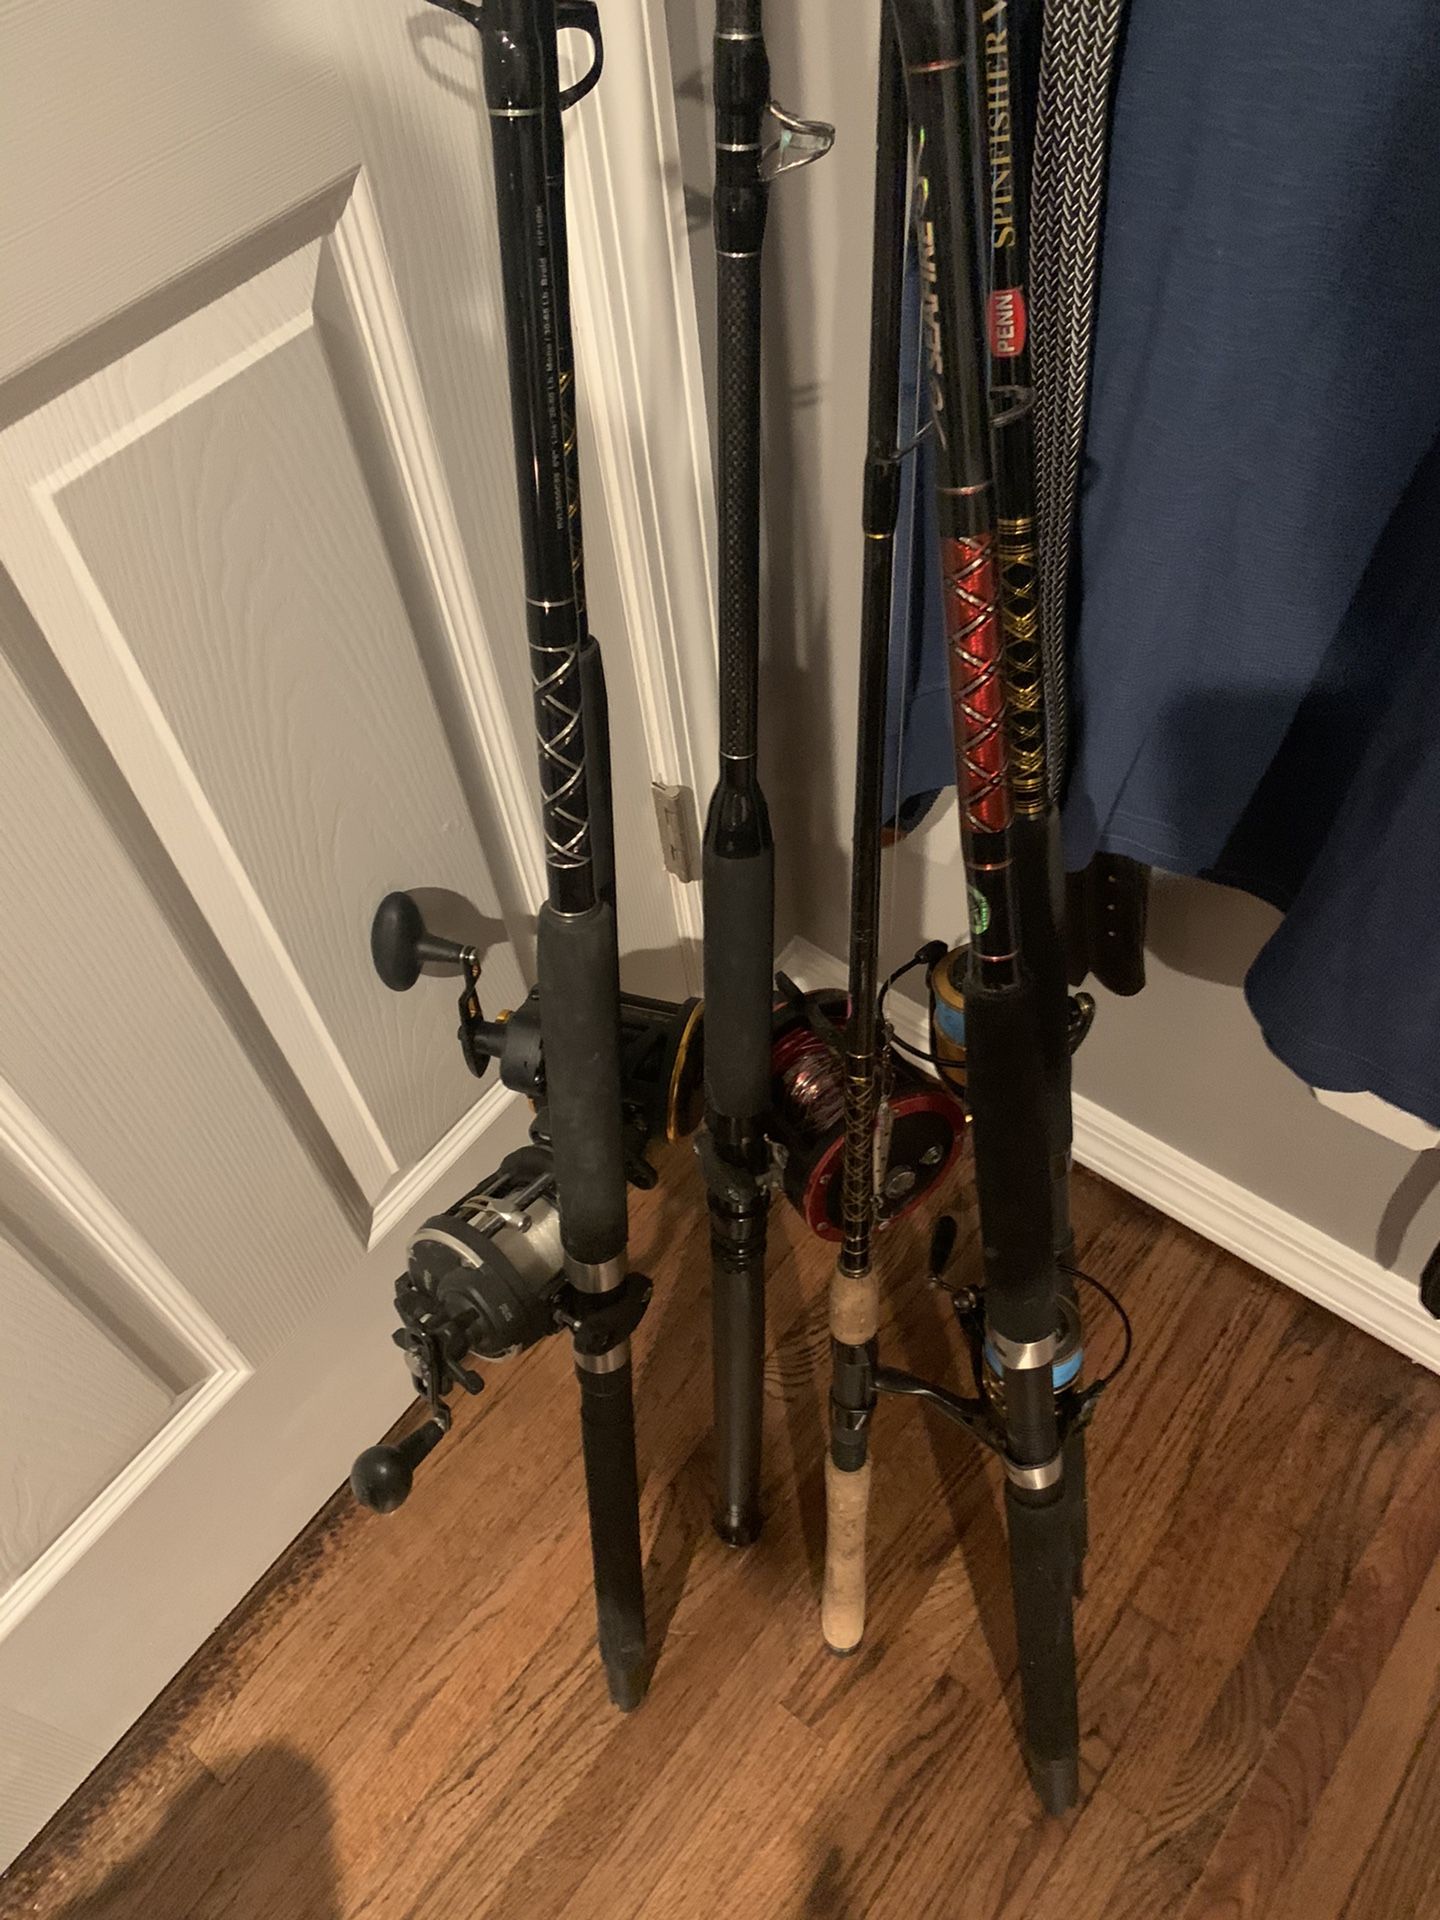 5 fishing rod and reel set ups and one rod